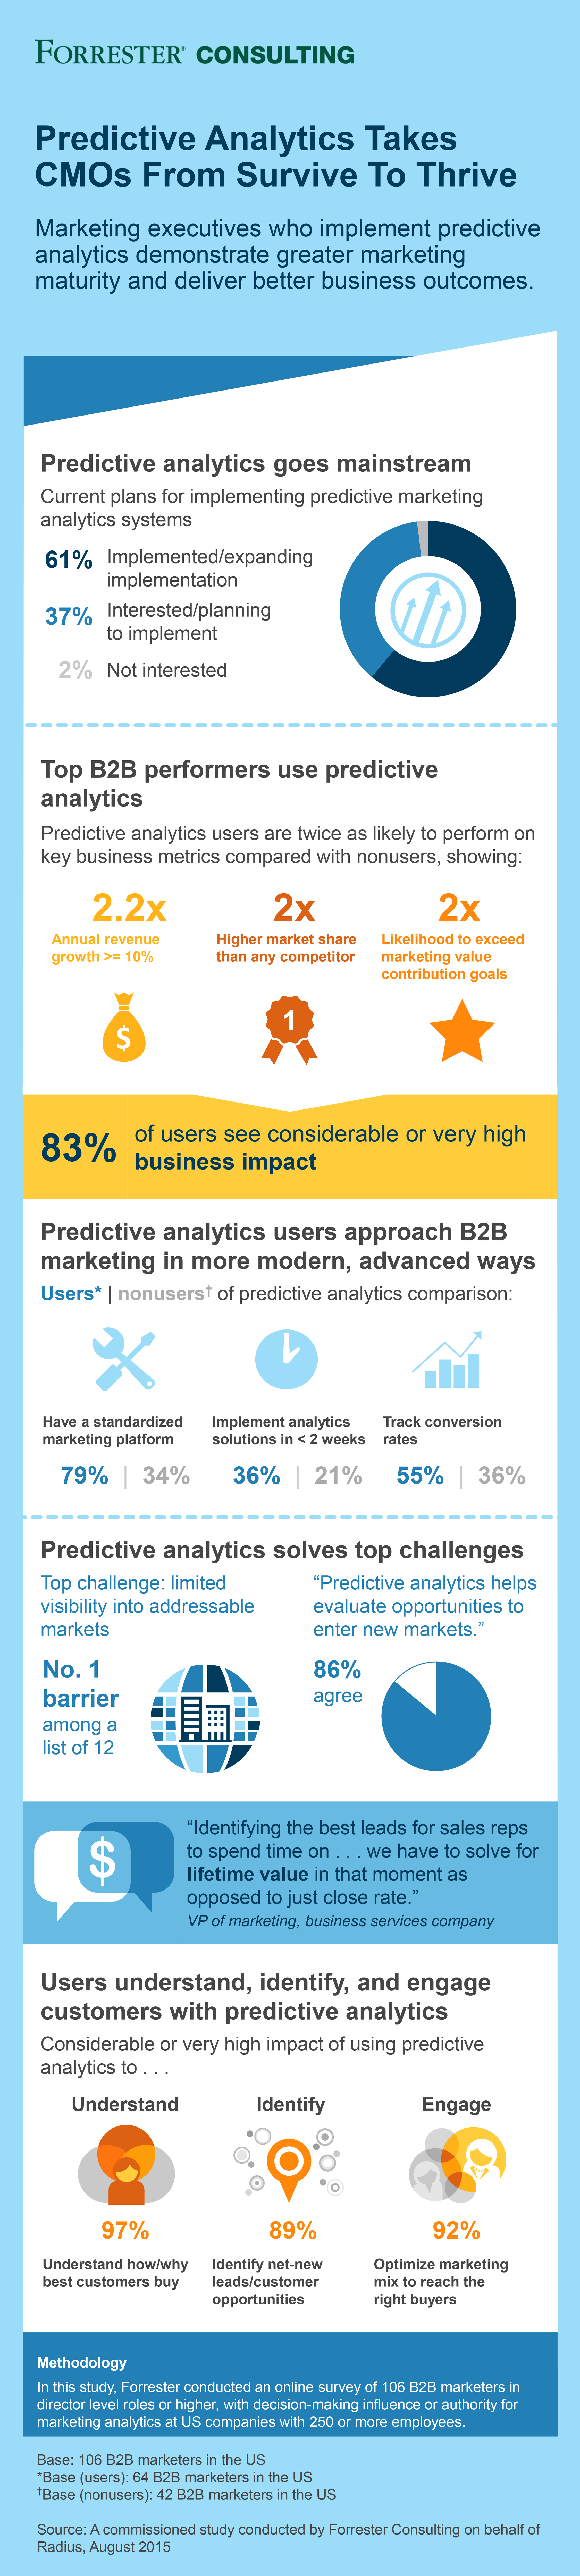 Predictive Analytics Takes CMOs From Survive to Thrive - Infographic